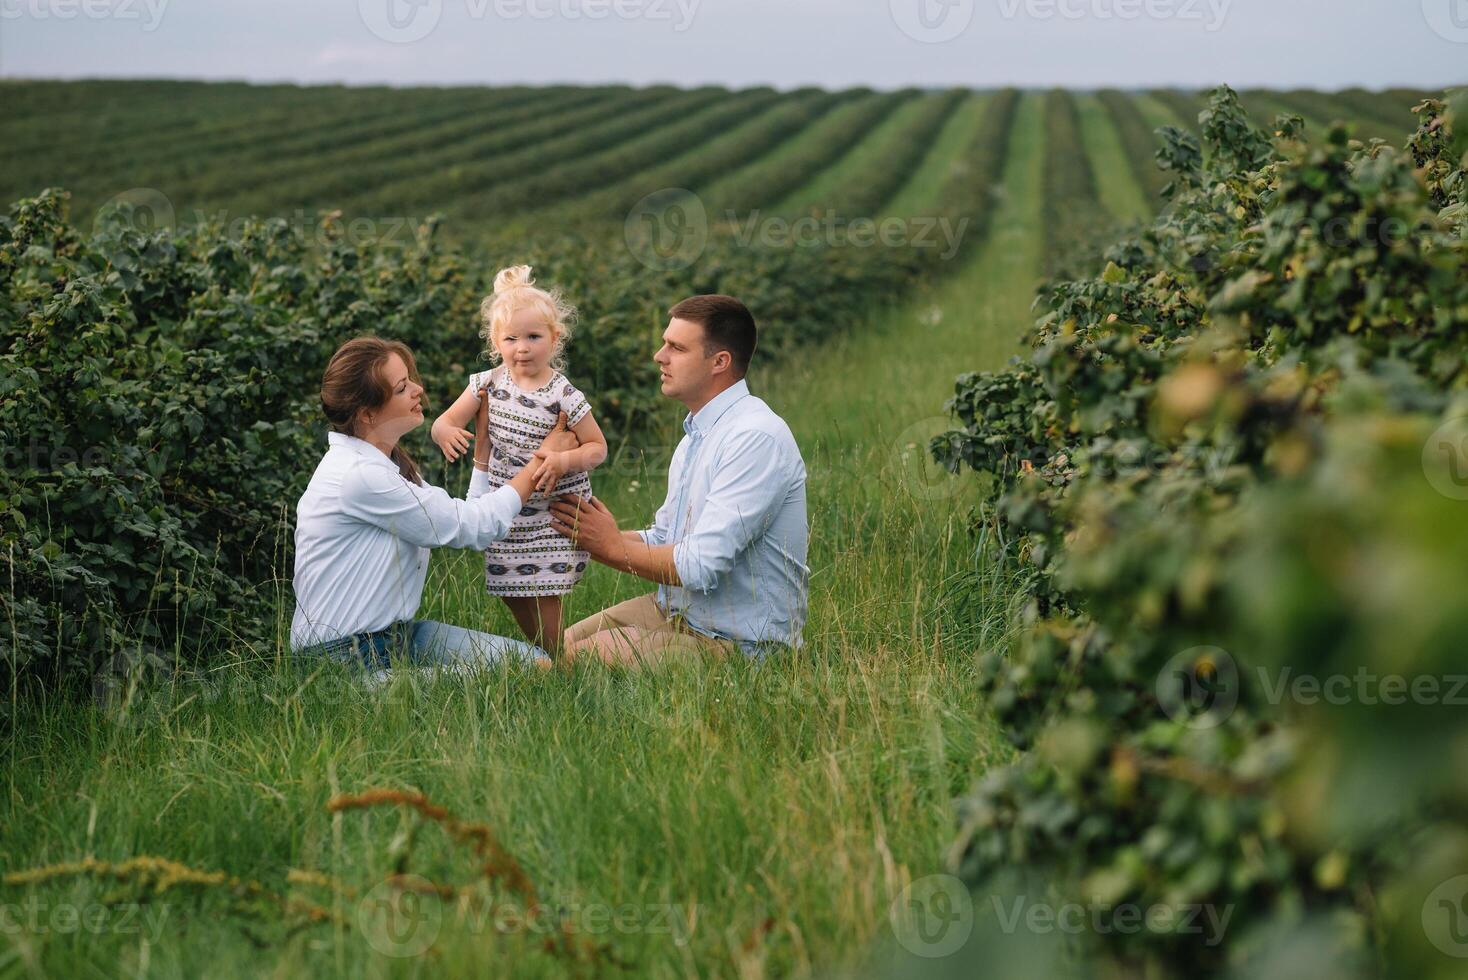 The daughter hugging parents on nature. Mom, dad and girl toddler, walk in the grass. Happy young family spending time together, outside, on vacation, outdoors. The concept of family holiday photo